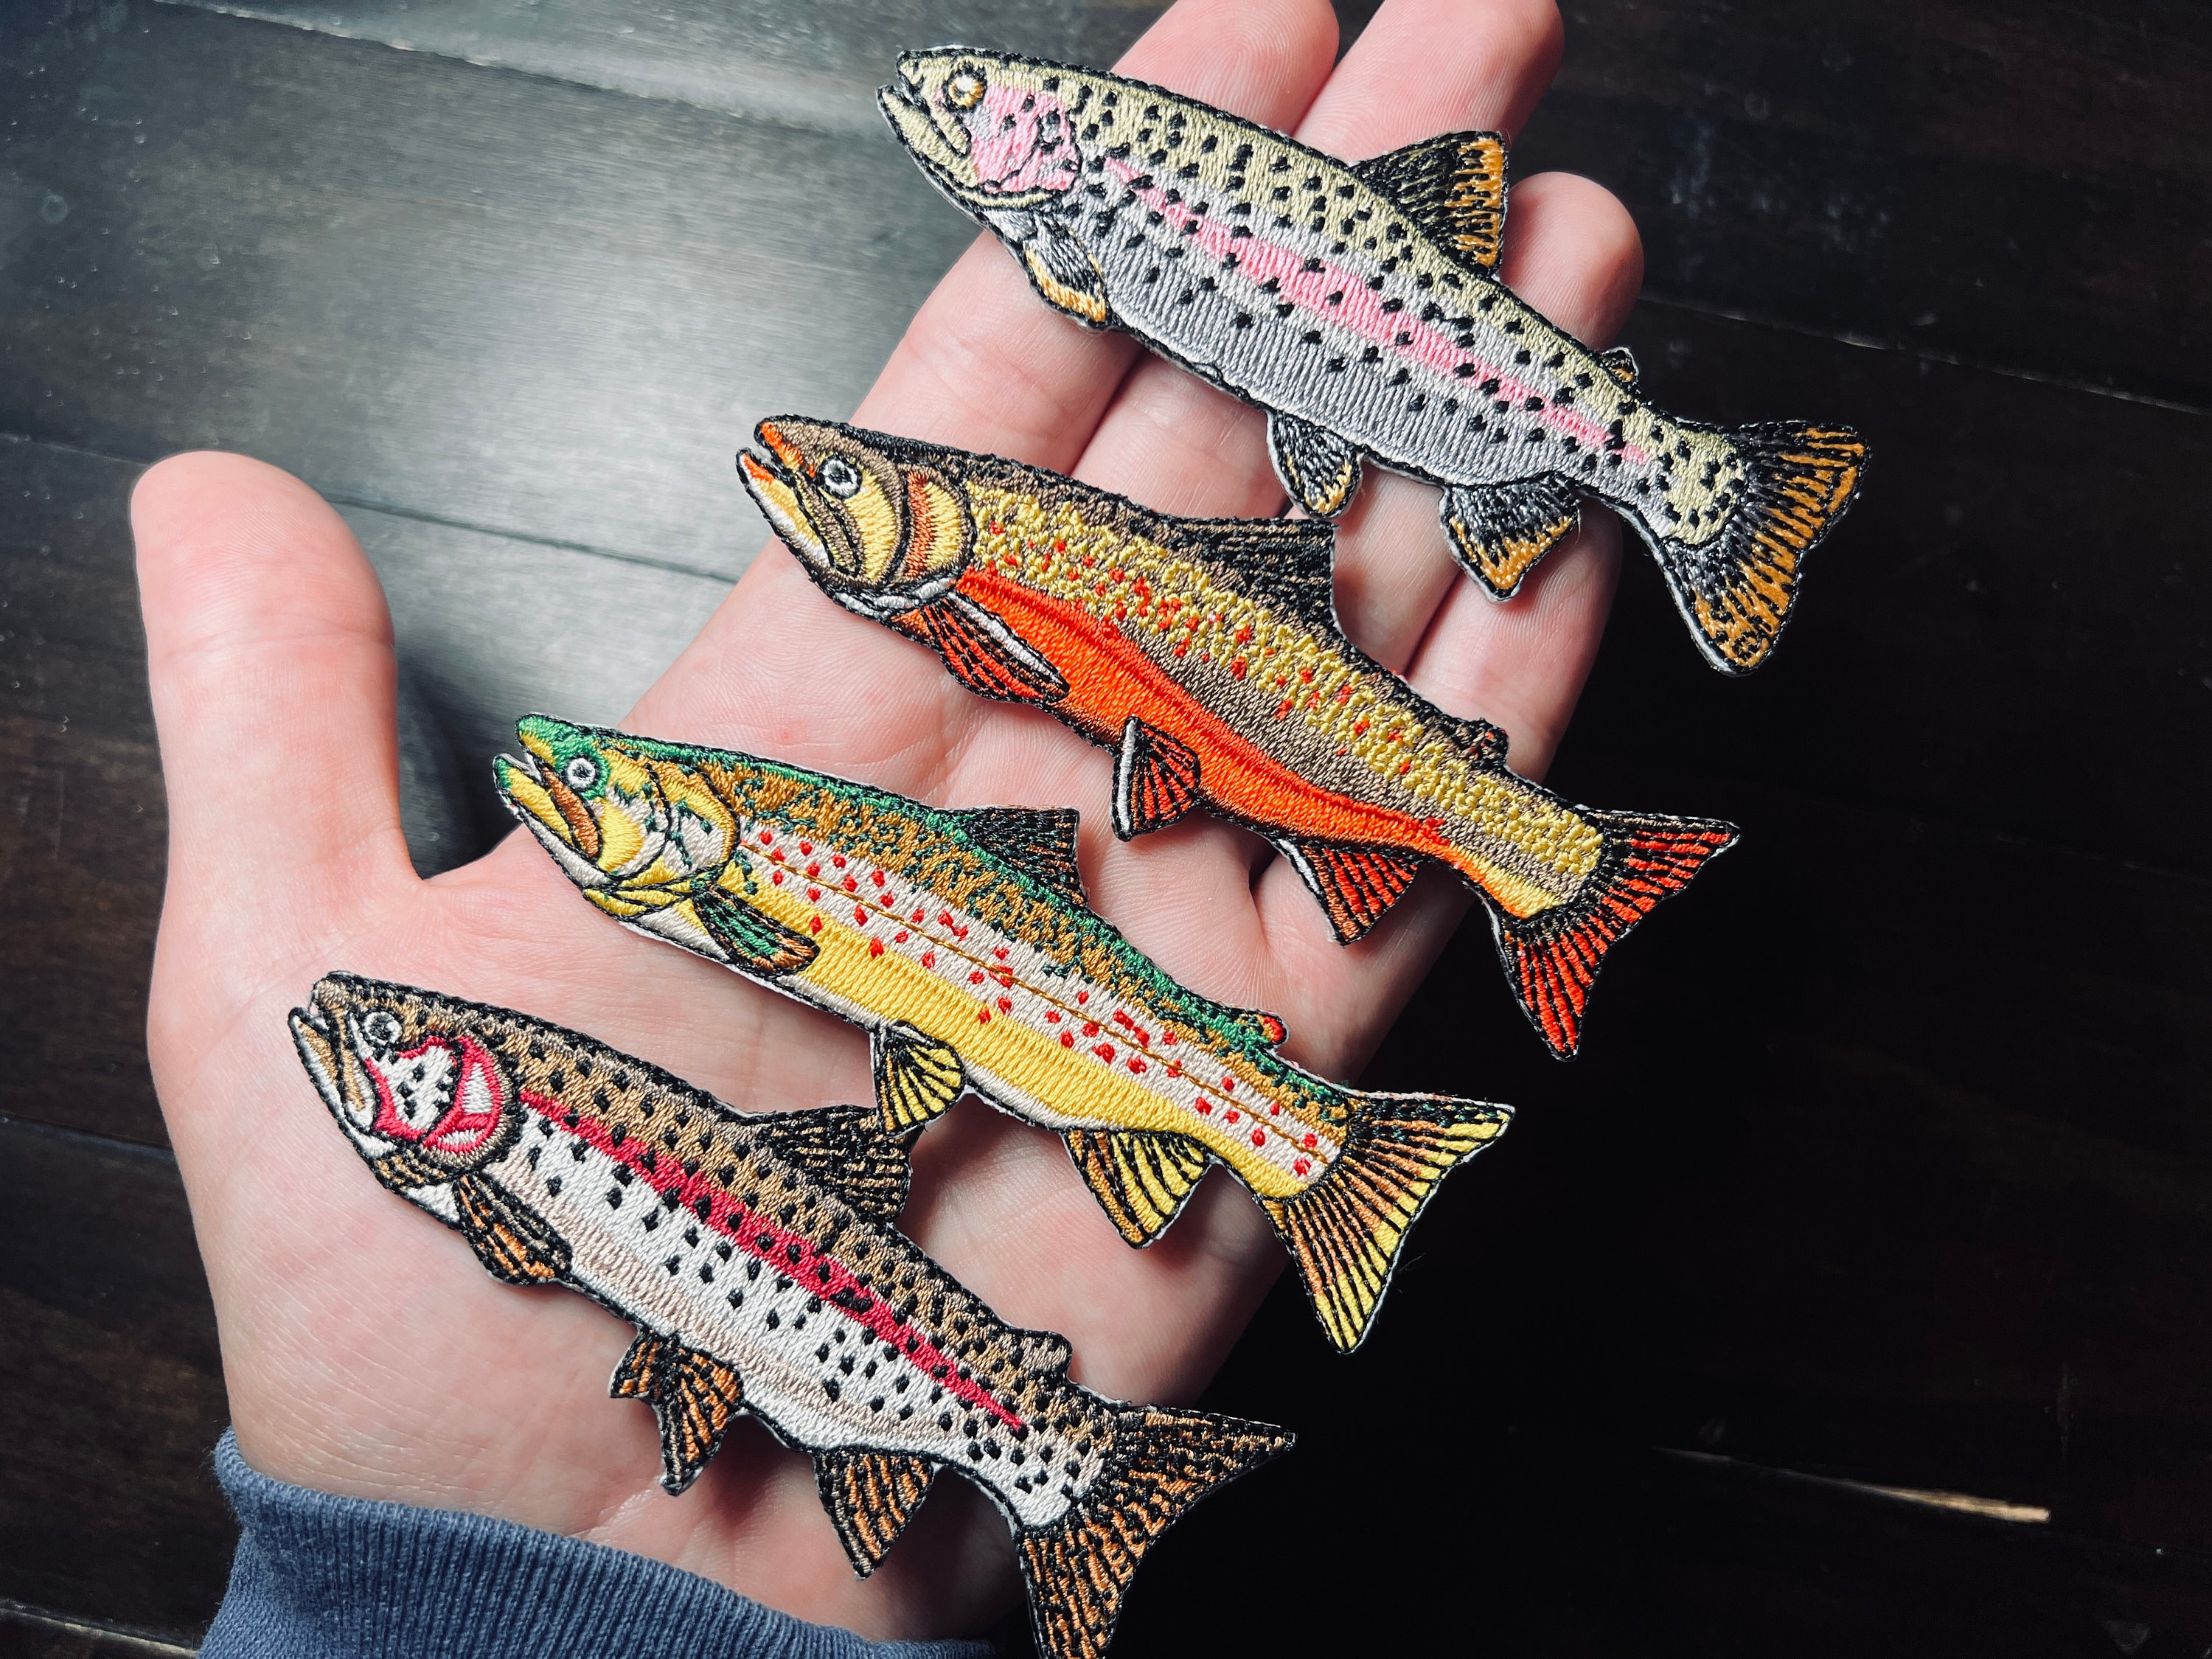 PatchStop Bass Fisherman Blue Tan Iron On Patches for Clothing Jeans -  3x3in Small DIY Sew On Patch for Jackets Bags - Embroidered Decorative  Fishing